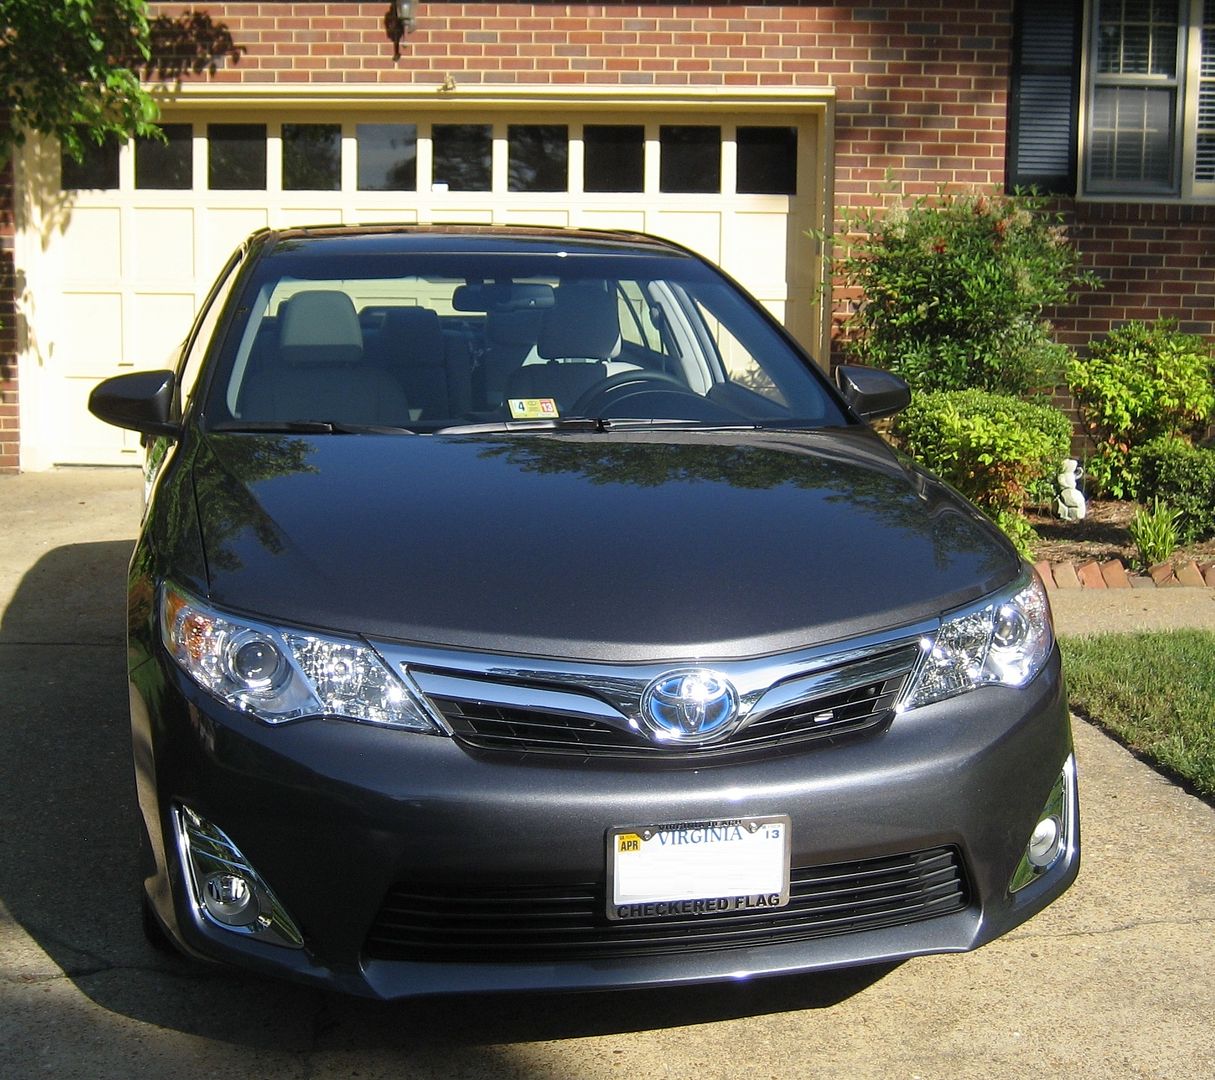 The 2012 Camry is not only a high-mileage wonder, but a genuinely beautiful car. And fun to drive, too. 